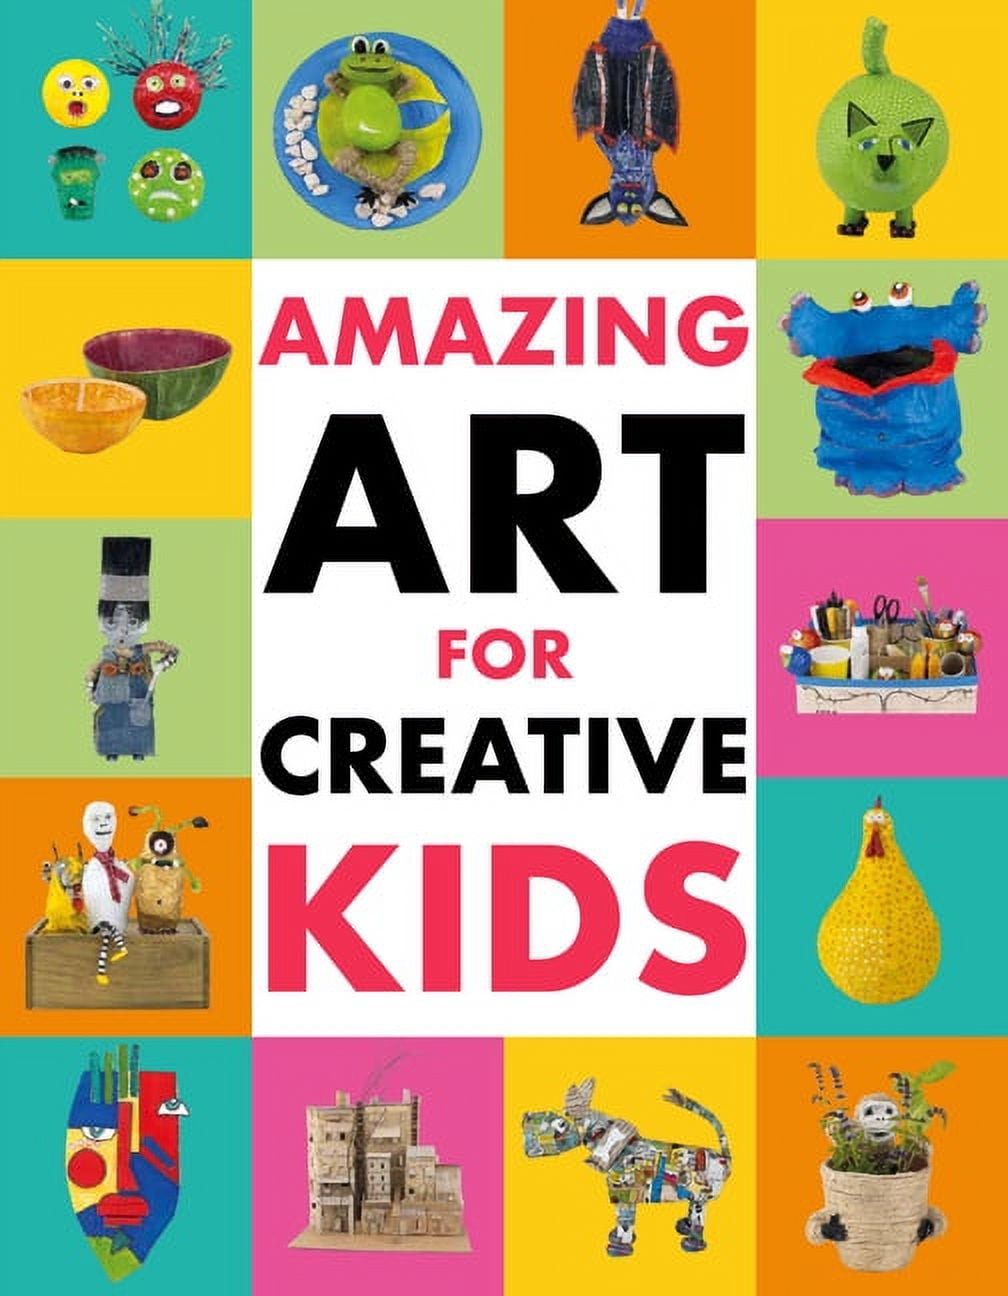 Amazing Art for Creative Kids: Turn Everyday Stuff Into a Monster-Size Maché Dinosaur, a Plant Pot Chimpanzee and Much More [Book]